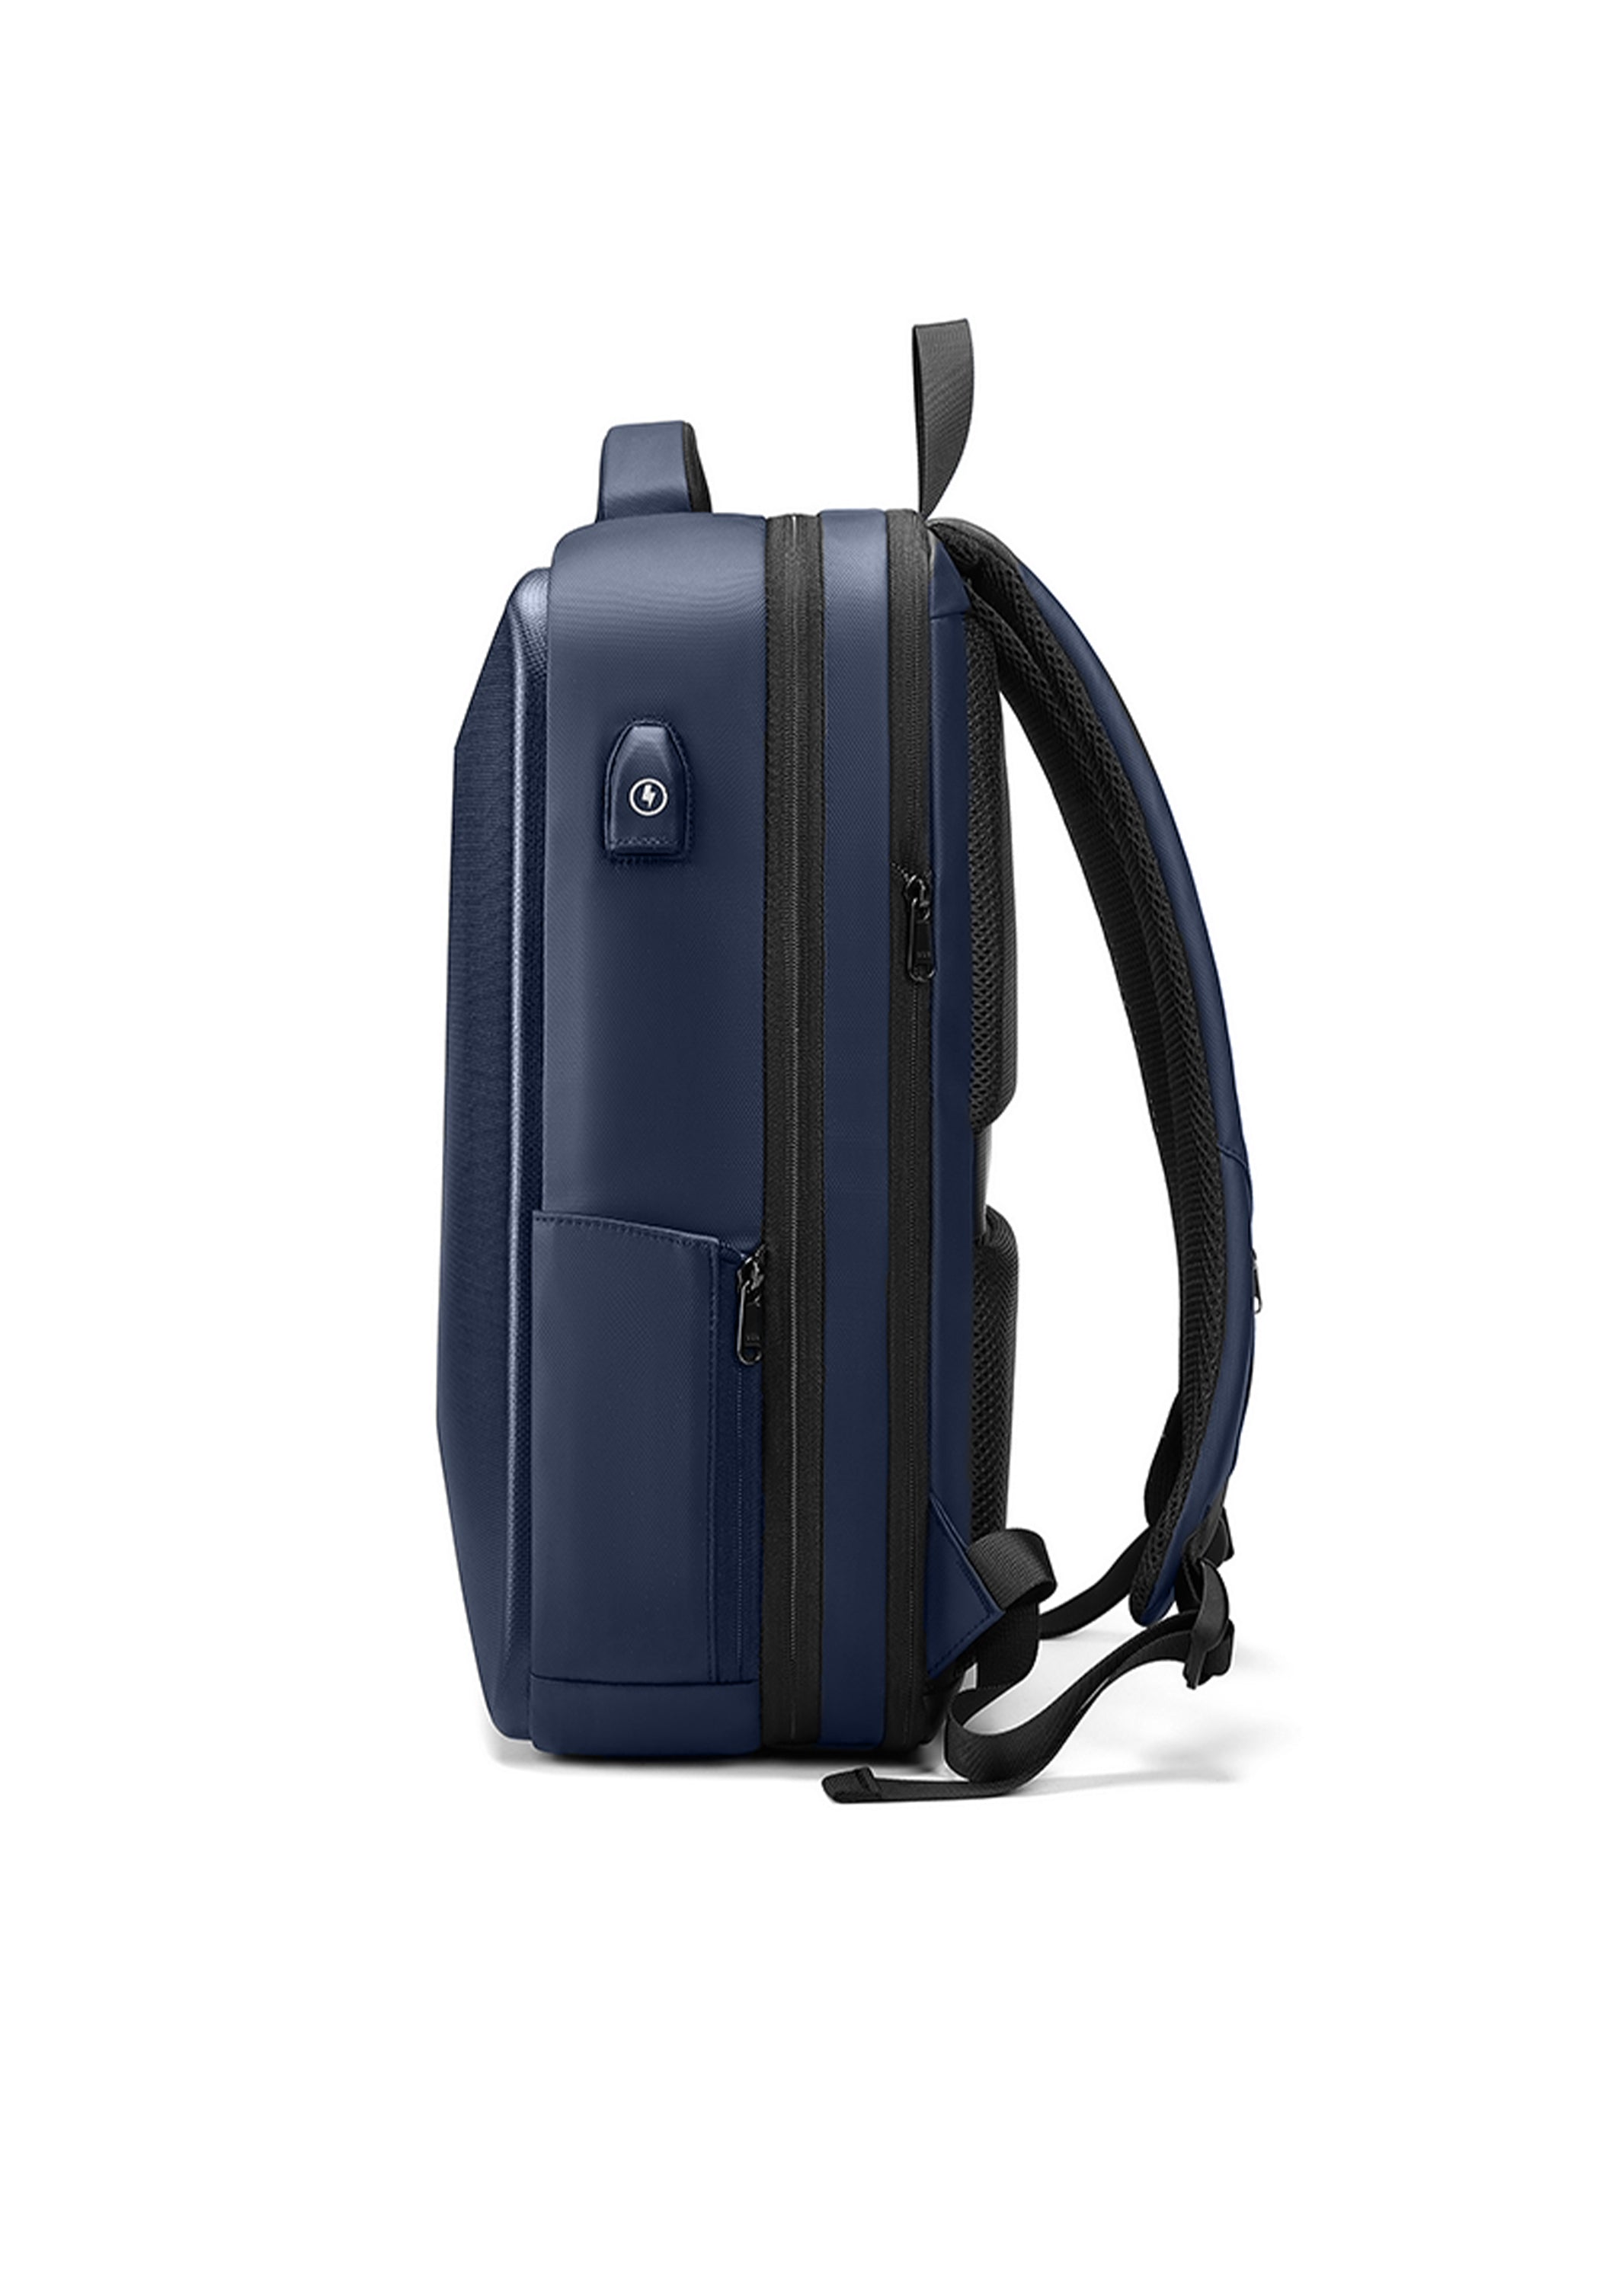 VOYAGER NAVY HARD SHELL BACKPACK